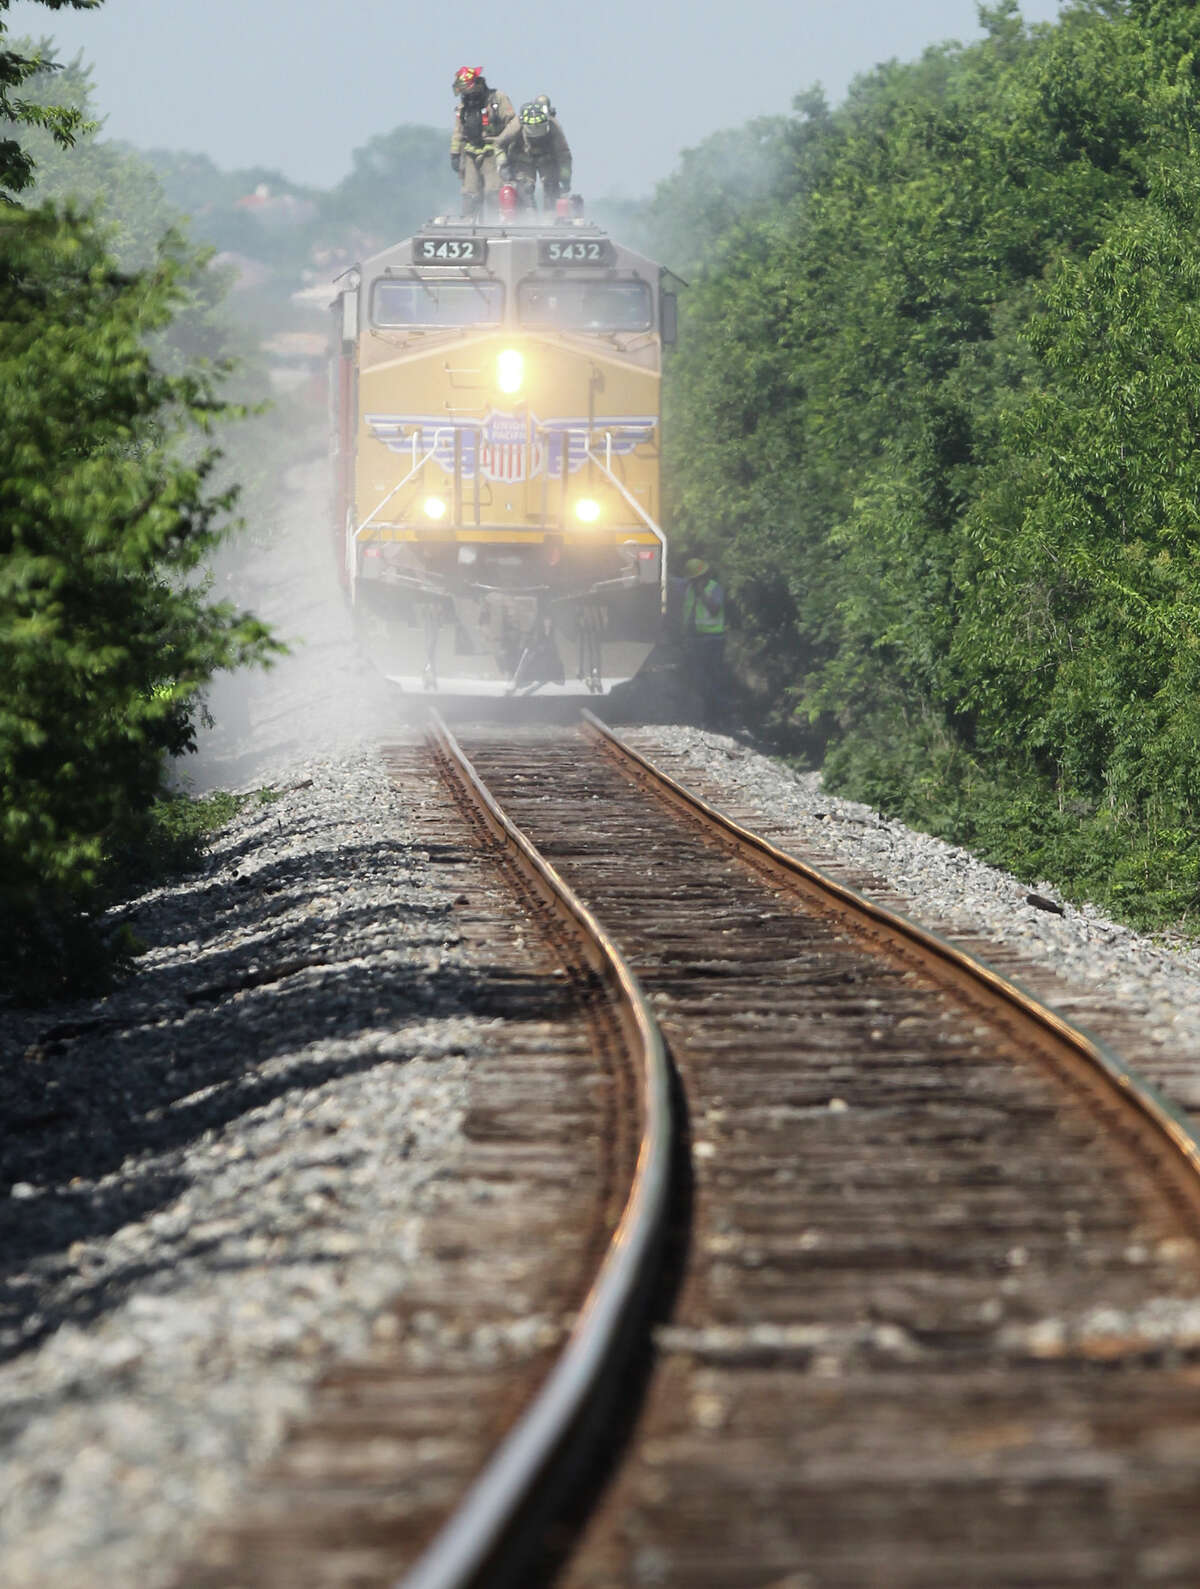 A Union Pacific freight train runs near Interstate 35 on a line the Lone Star Rail District had hoped to use for passenger trains. UP pulled out of an agreement to study that possibility, a blow to the district’s plans to build a passenger rail line known as LSTAR between San Antonio and Georgetown, north of Austin.